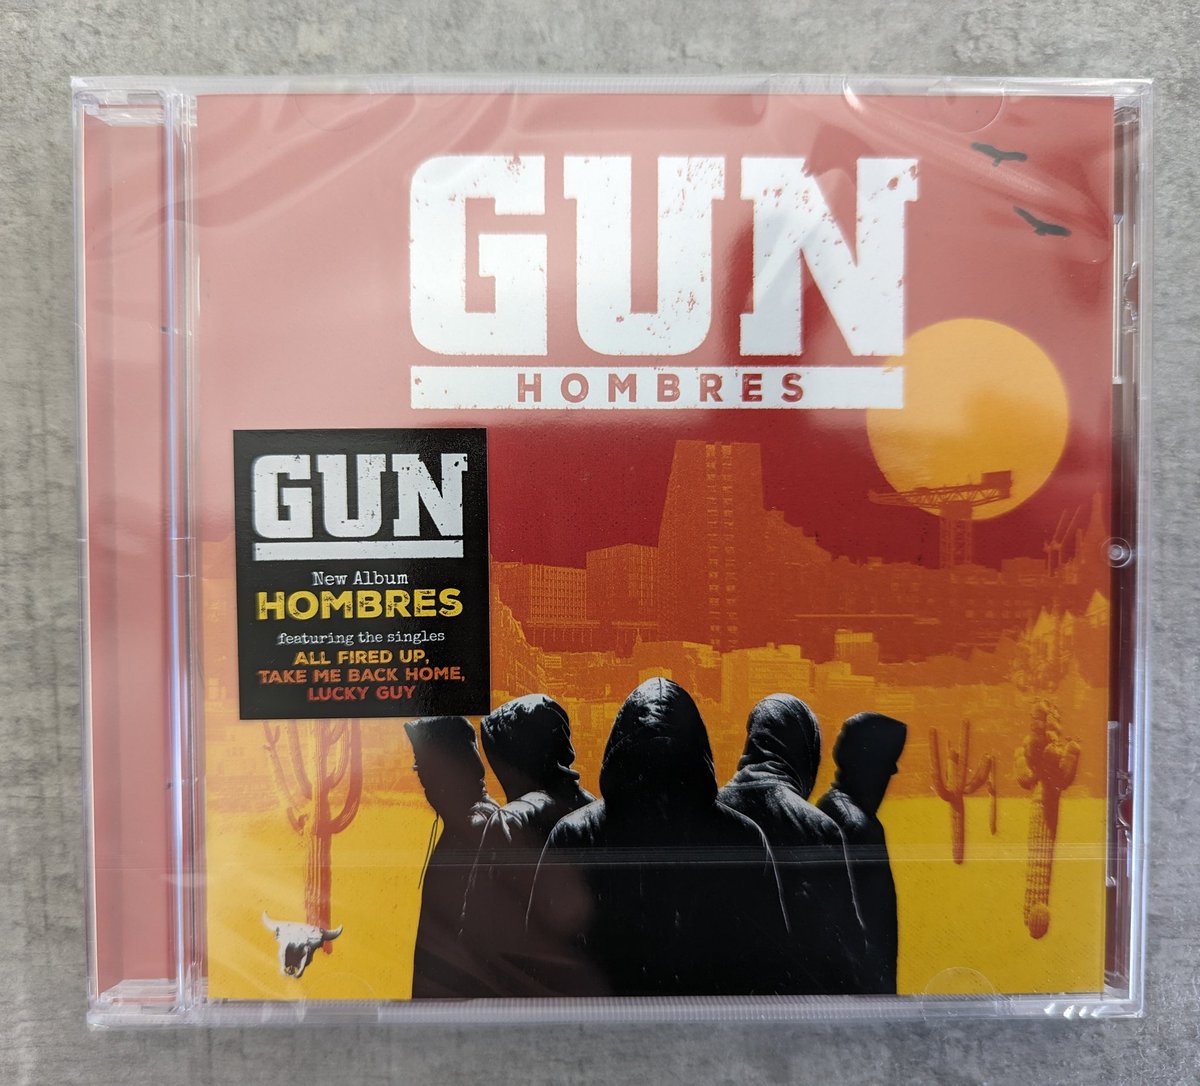 #competition Join us in congratulating @PaulEntwistle6 as the winner of the new and sealed album from @gunofficialuk #Hombres - an absolutely stunning record! Stay tuned - more competitions on their way!